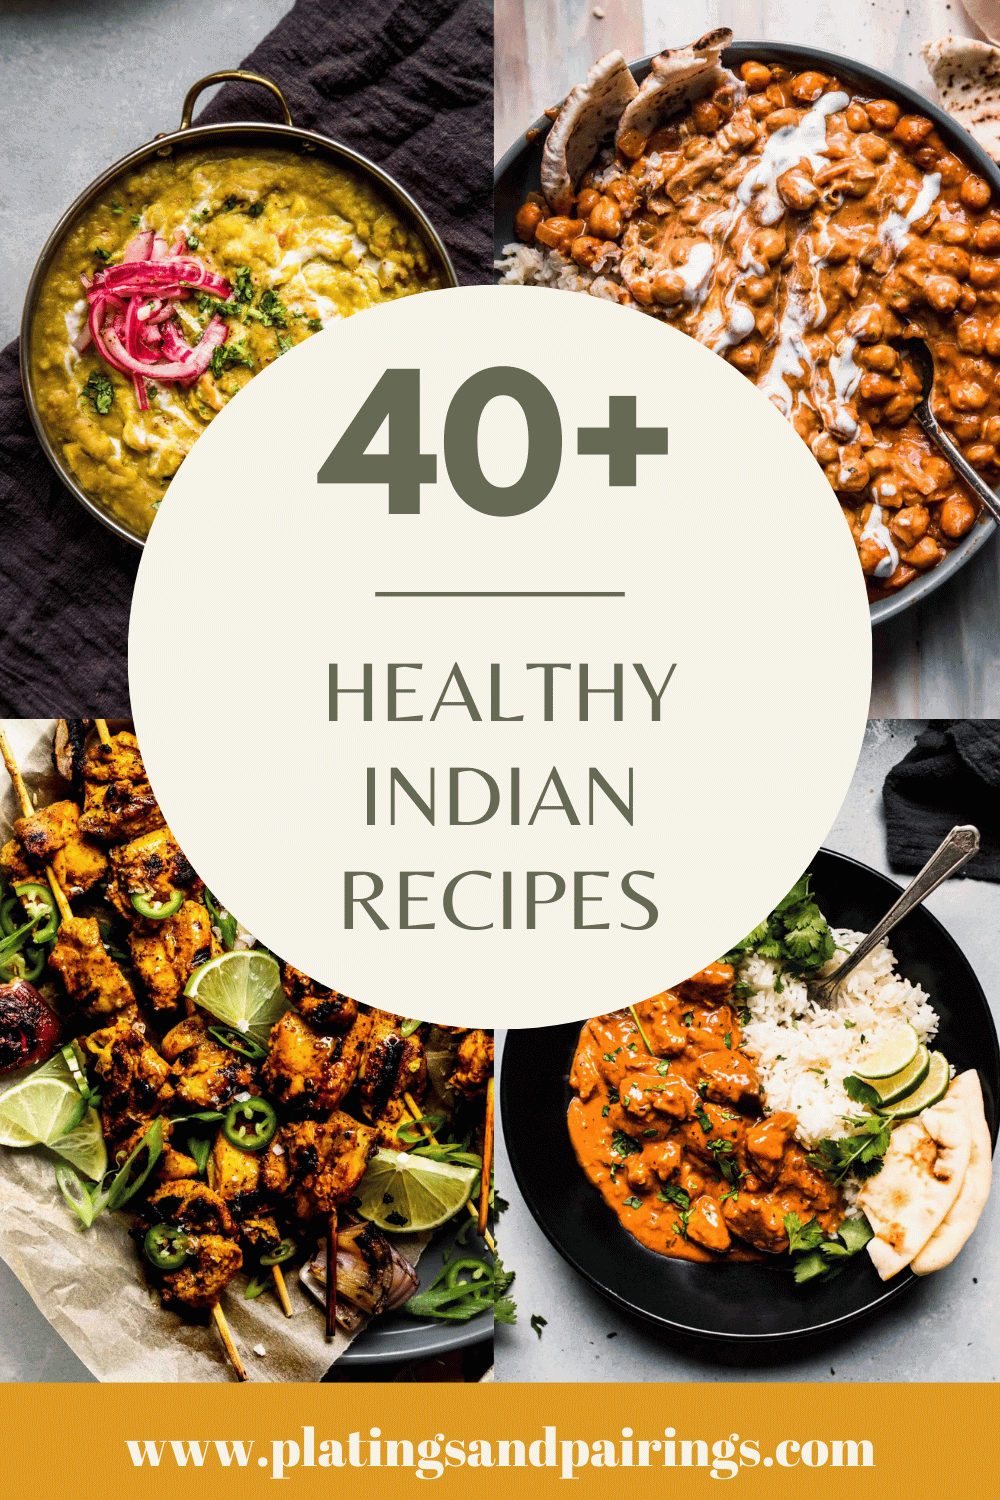 Collage of healthy indian recipes with text overlay.